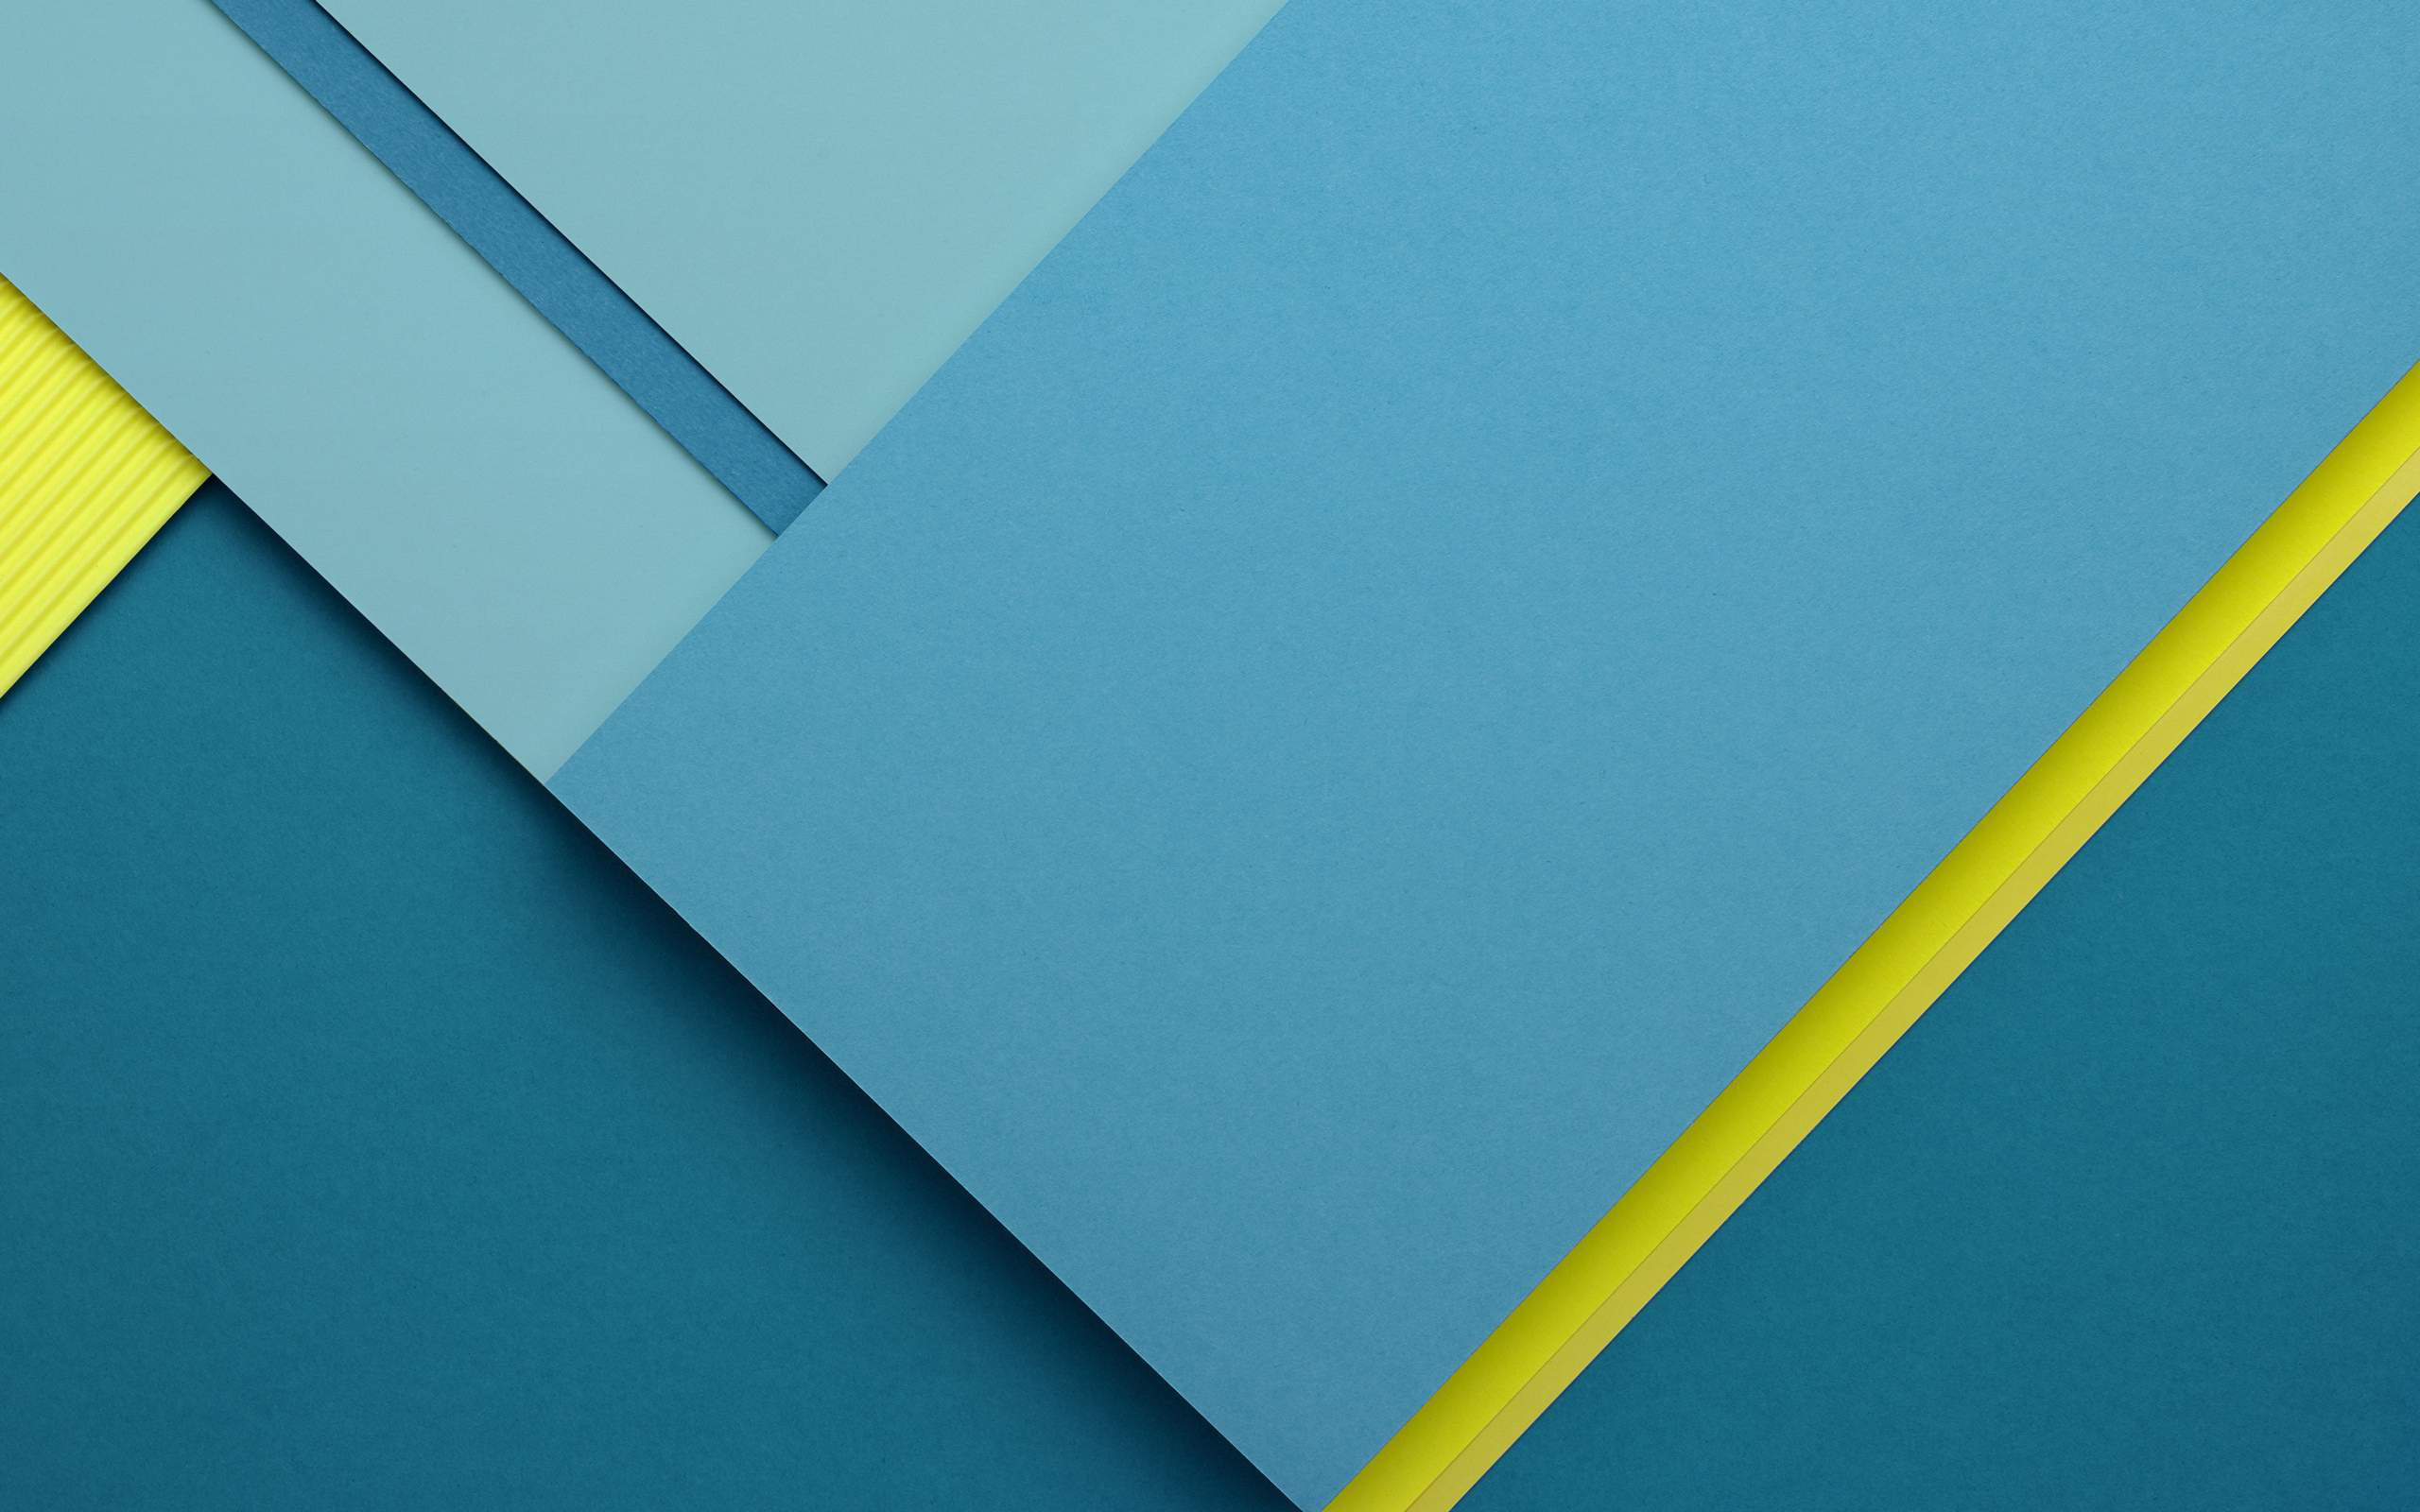 chrome os wallpapers,blue,yellow,turquoise,paper,construction paper